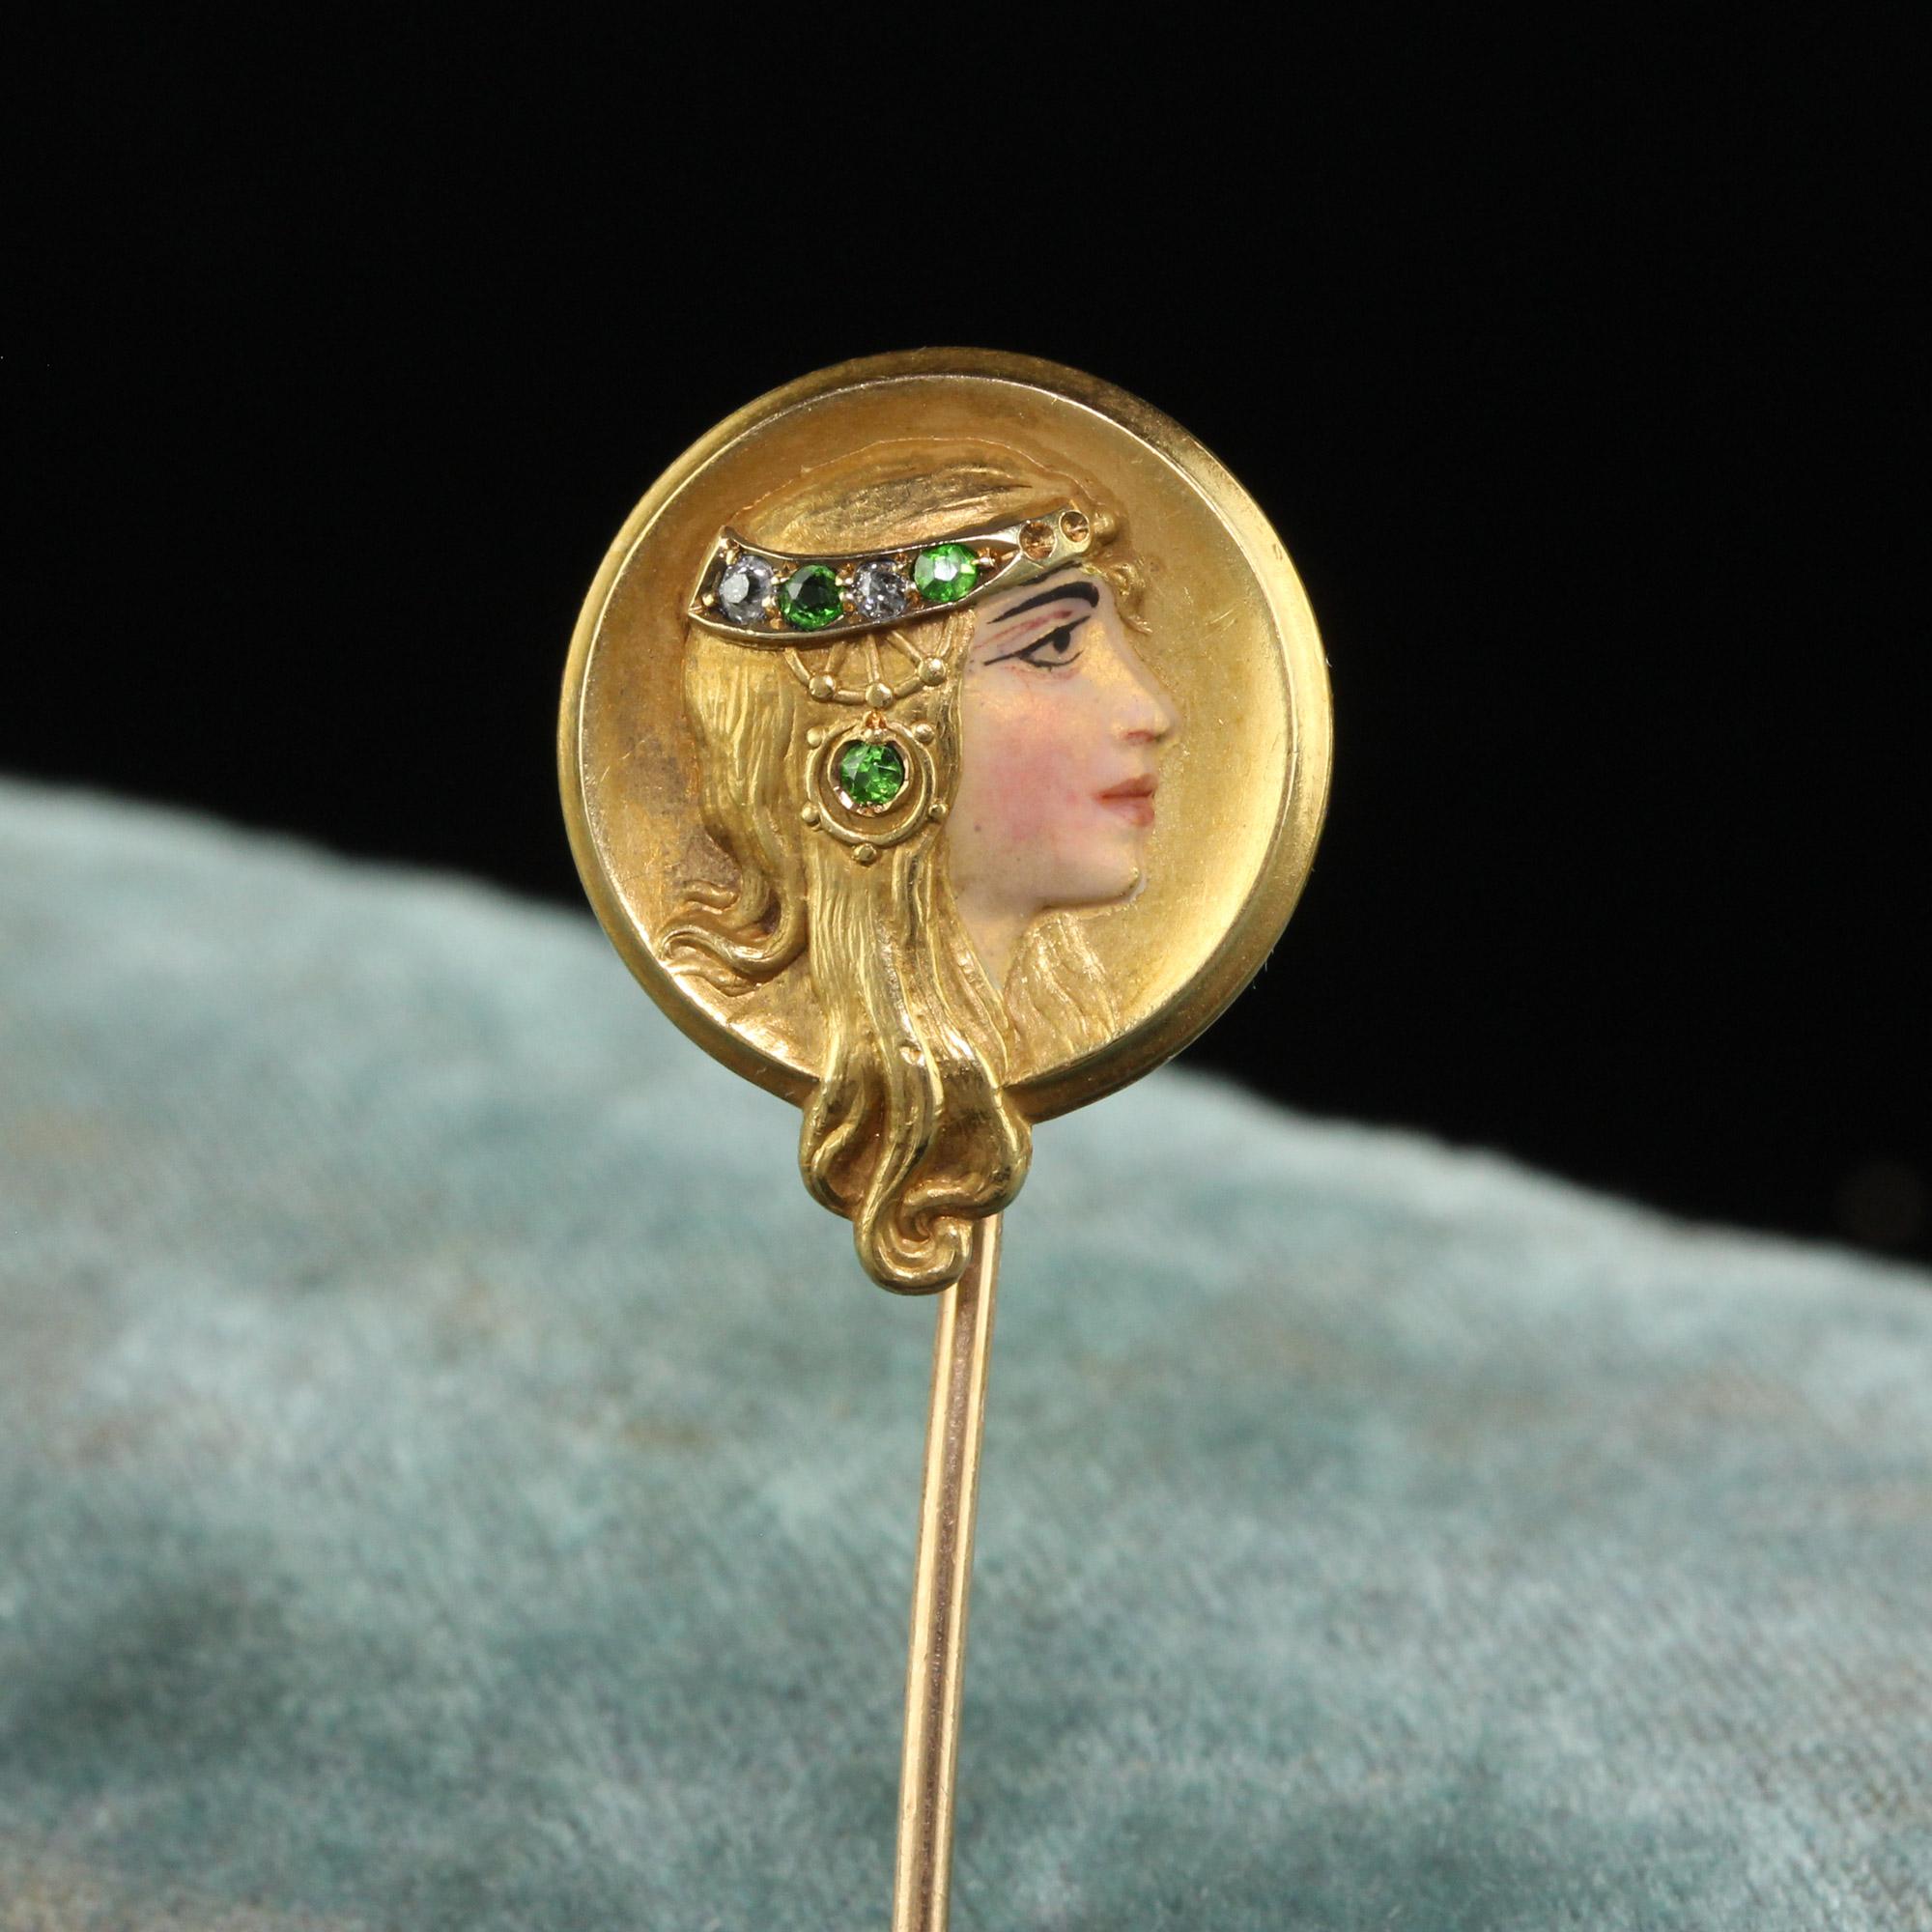 Beautiful Antique Art Nouveau 14K Yellow Gold Diamond Demantoid Enamel Lady Stick Pin. This gorgeous Art Nouveau stick pin is crafted in 14k yellow gold. The pin features a lady that has gorgeous enameling which resembles her makeup. She has a